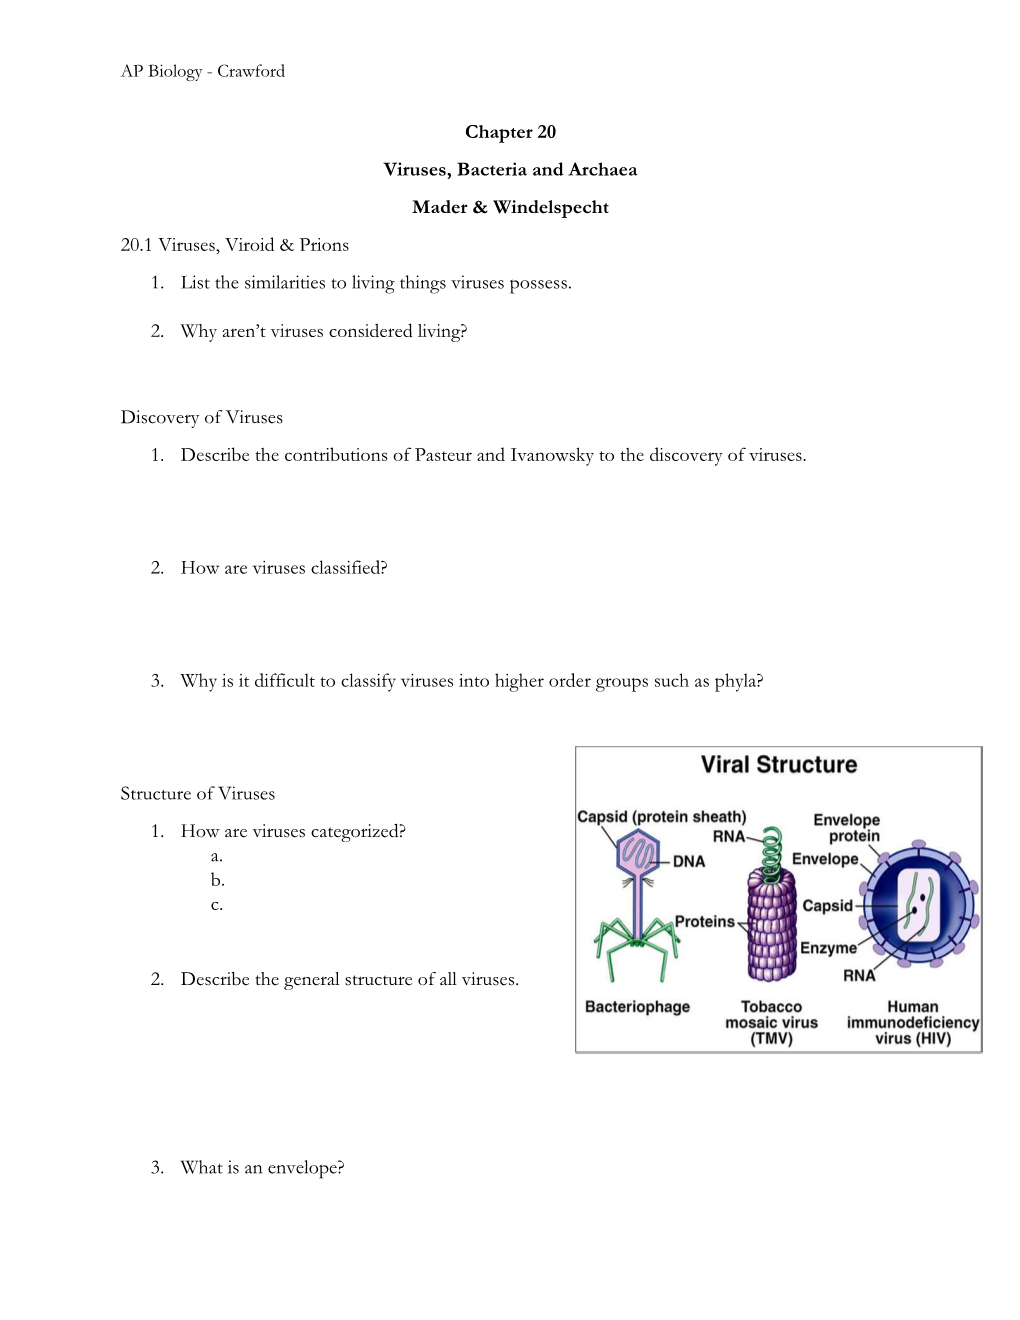 Chapter 20 Viruses, Bacteria and Archaea Mader & Windelspecht